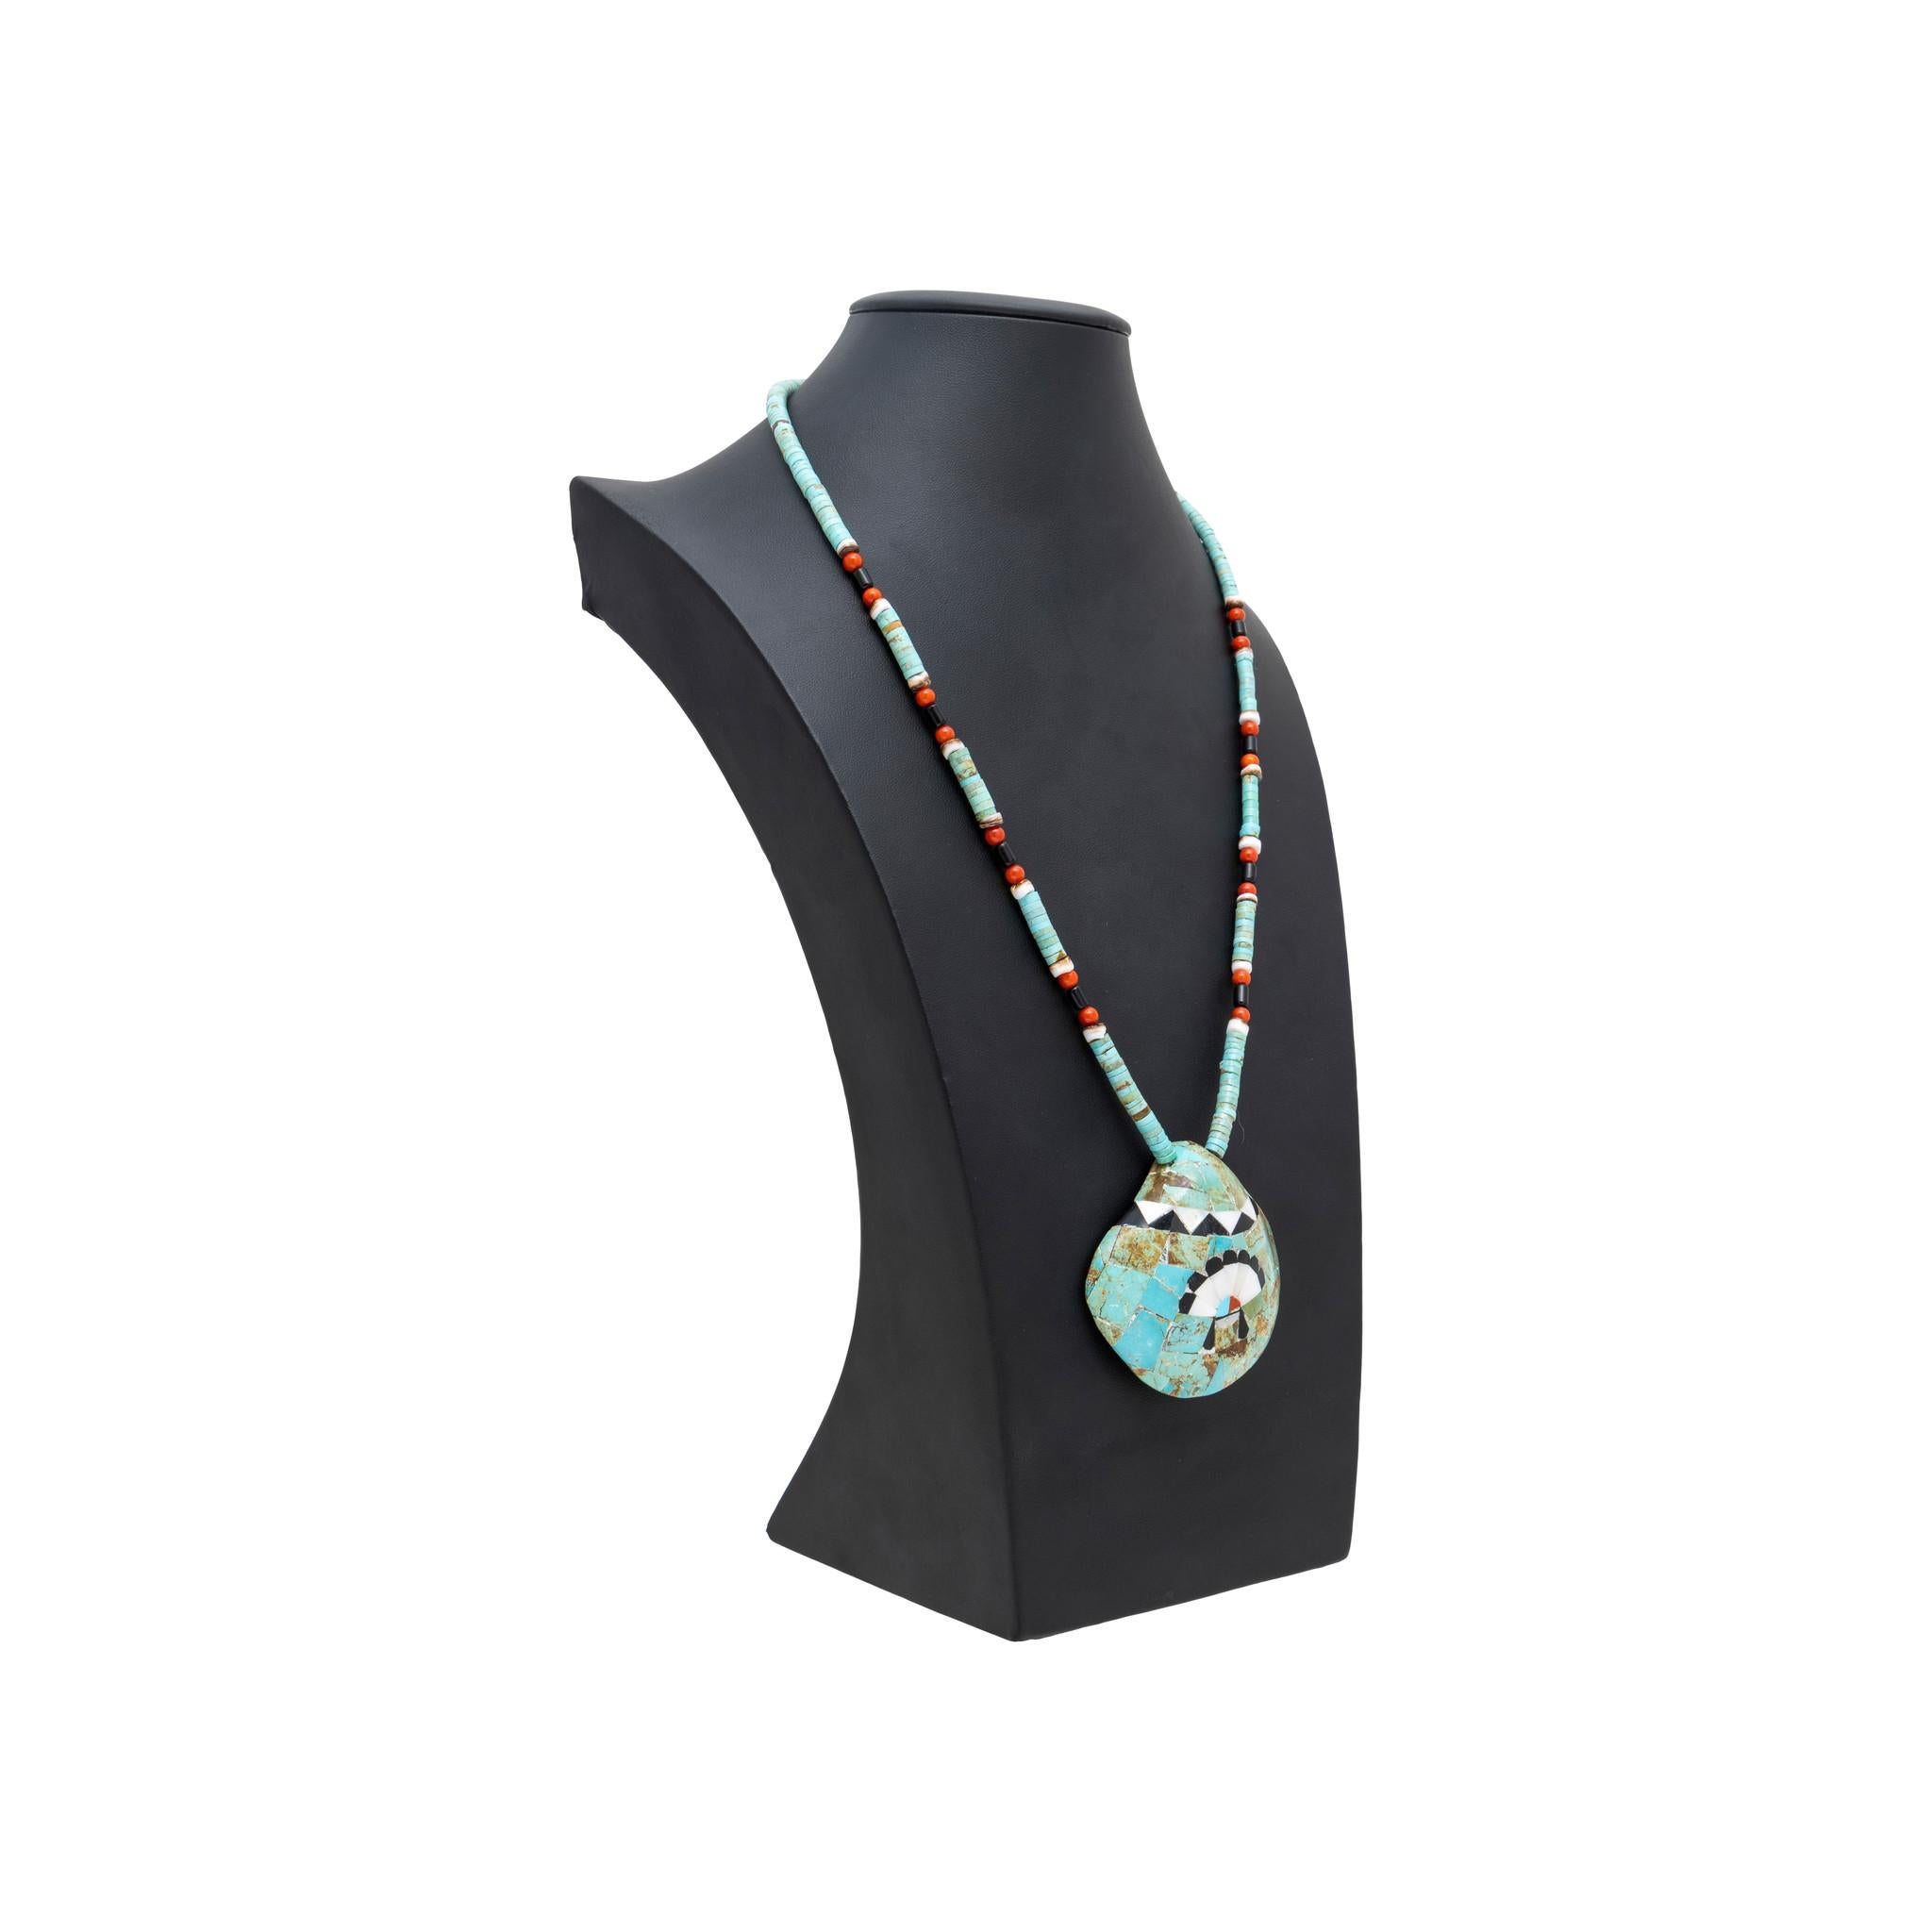 Zuni Turquoise Beaded Shell Pendant Necklace In Good Condition For Sale In Coeur d Alene, ID